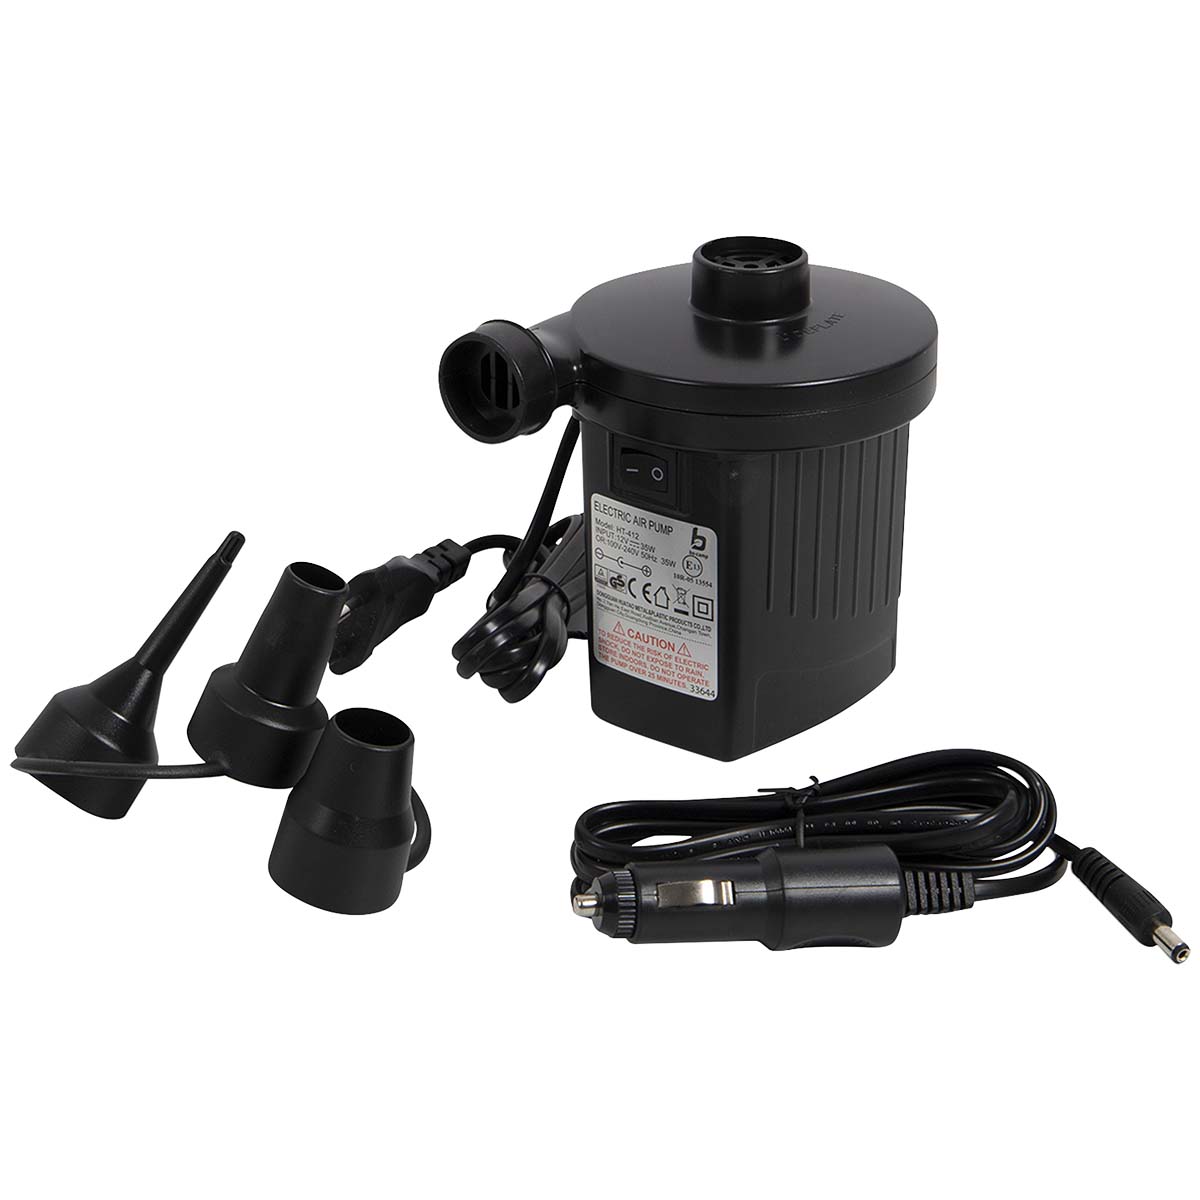 3807175 An electric pump for inflating and deflating an air mattress, inflatable boat, toys, etc. Suitable for a 12 Volt and a 230 Volt connection. This pump has an air flow of 230 litre per minute. Comes complete with reducers and adapters.